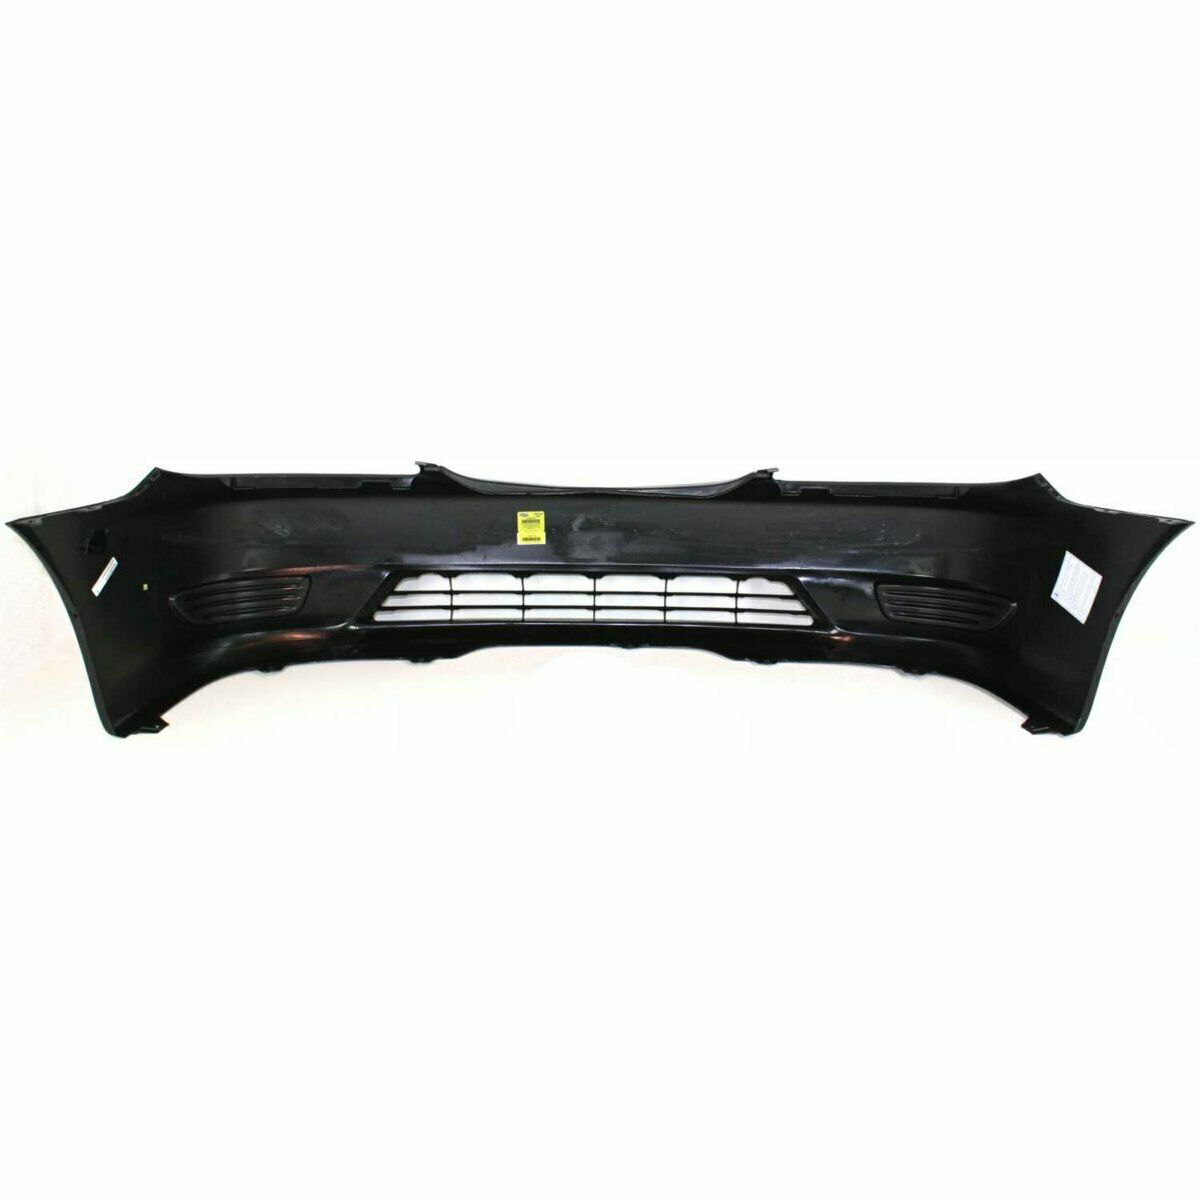 2005-2006 Toyota Camry Front Bumper W/O Fog to Match Painted to Match